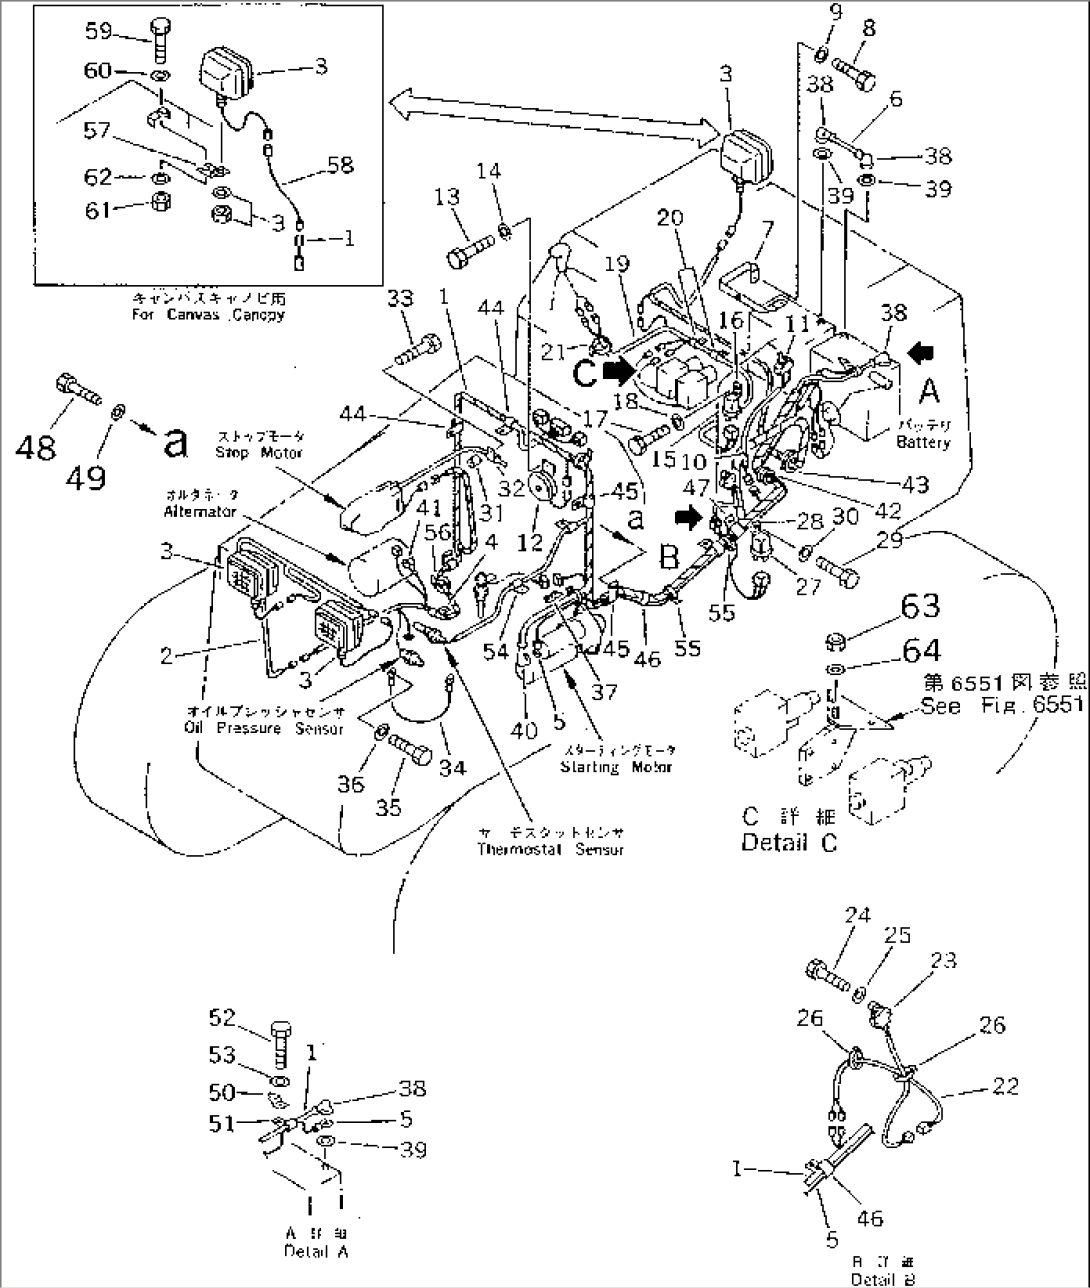 ELECTRICAL SYSTEM (WITH KEY STOP MOTOR)